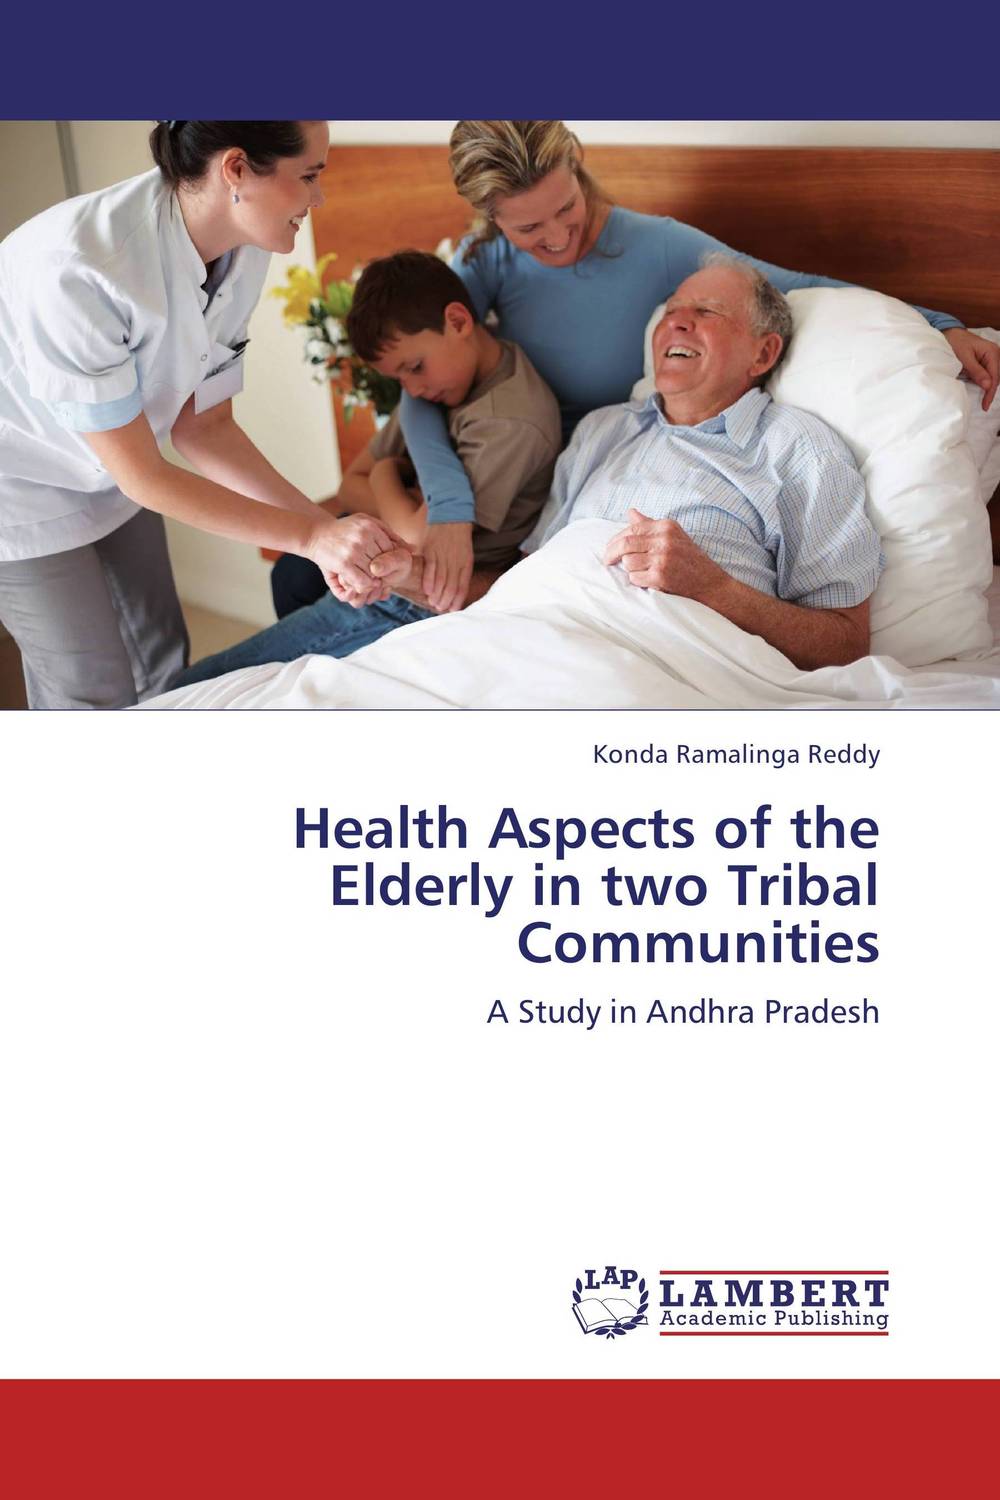 Health Aspects of the Elderly in two Tribal Communities